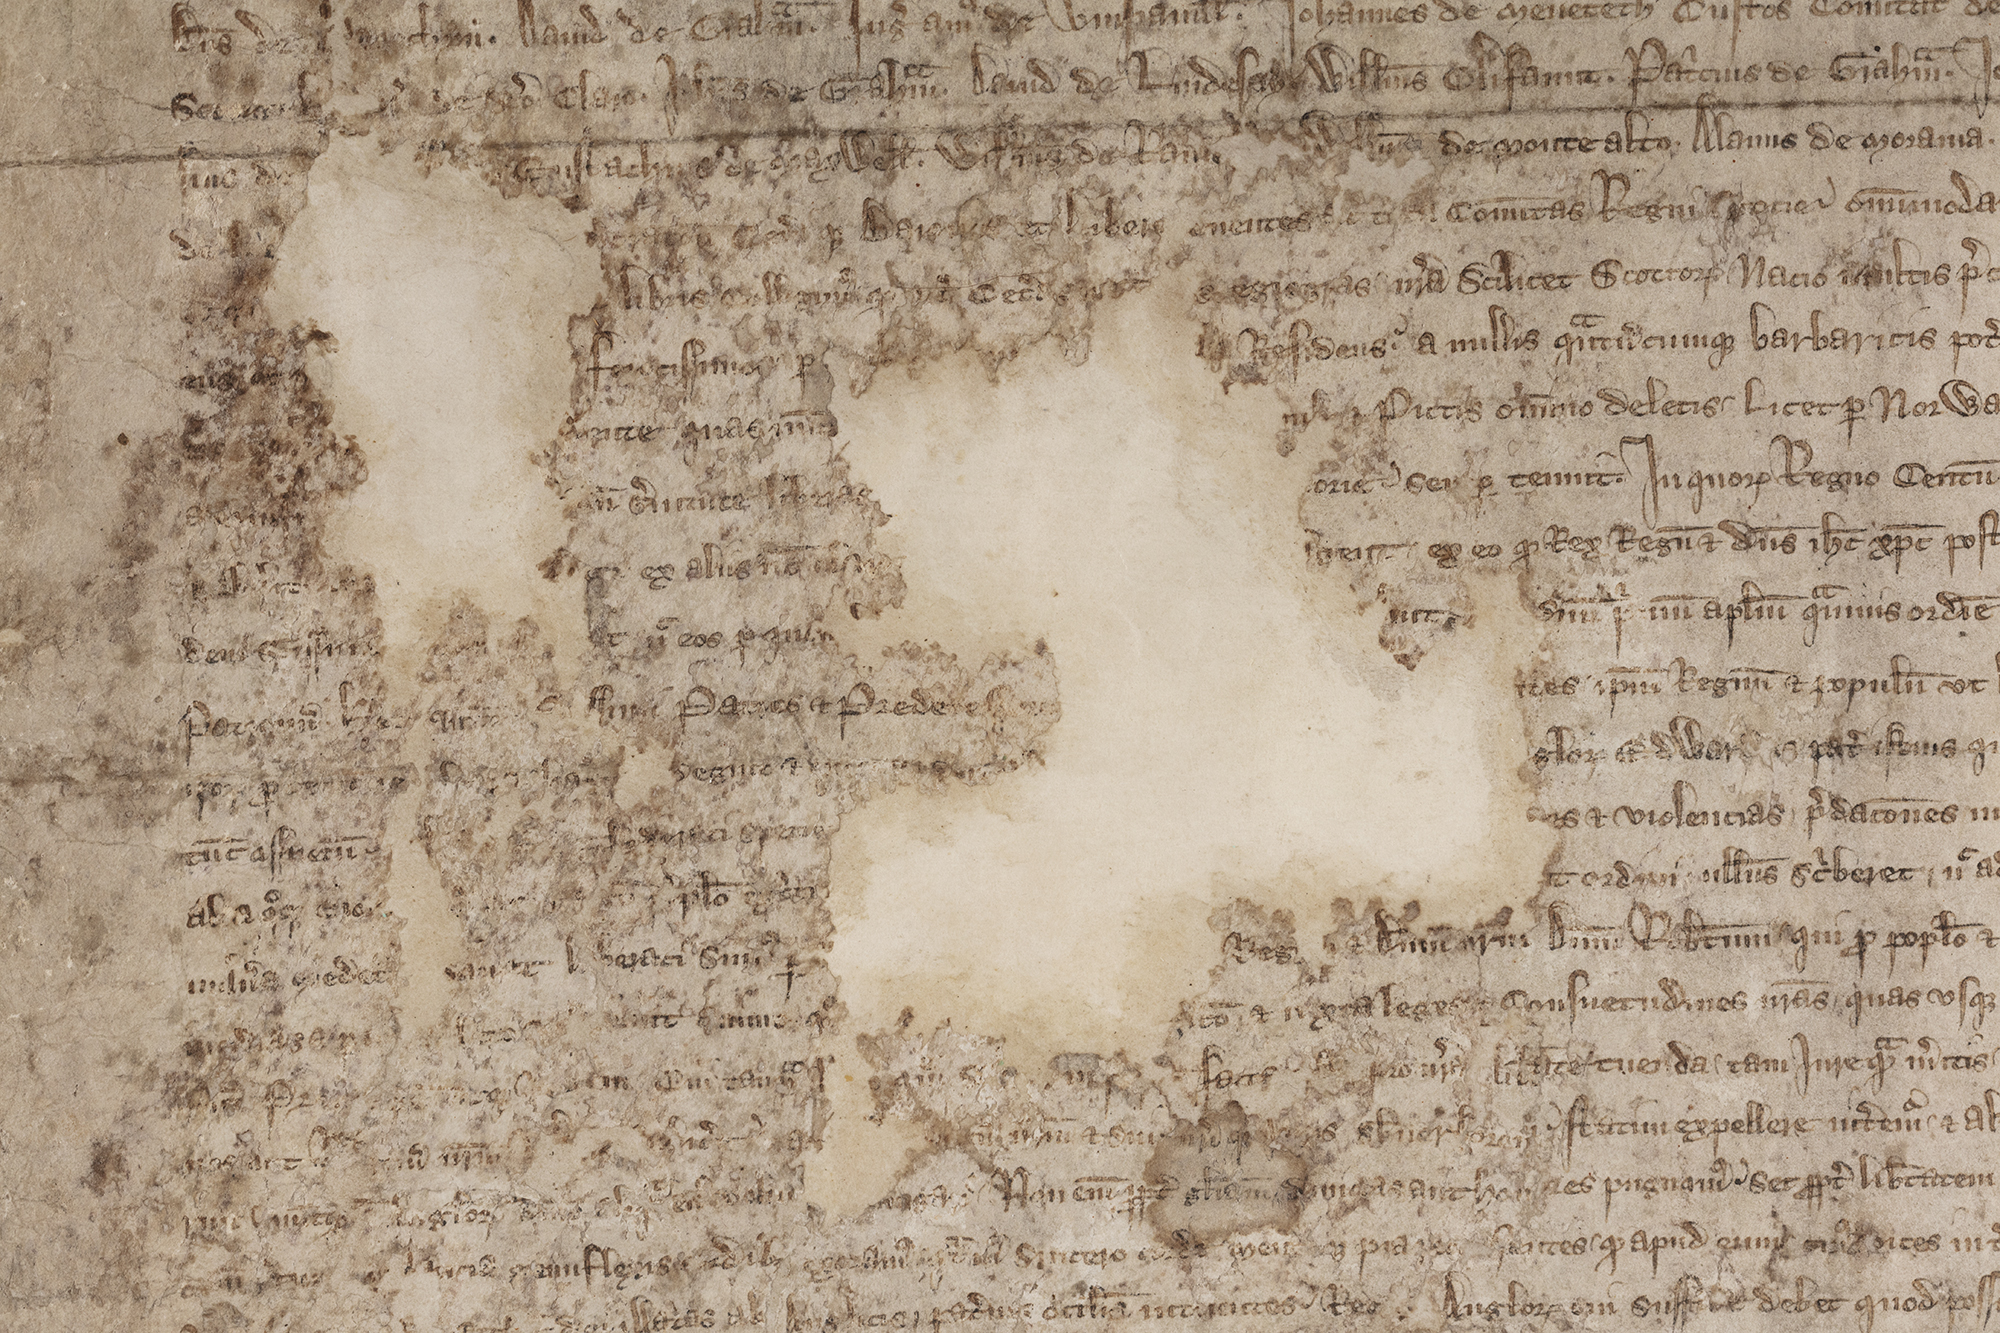 detail of the Declaration of Arbroath showing damaged area